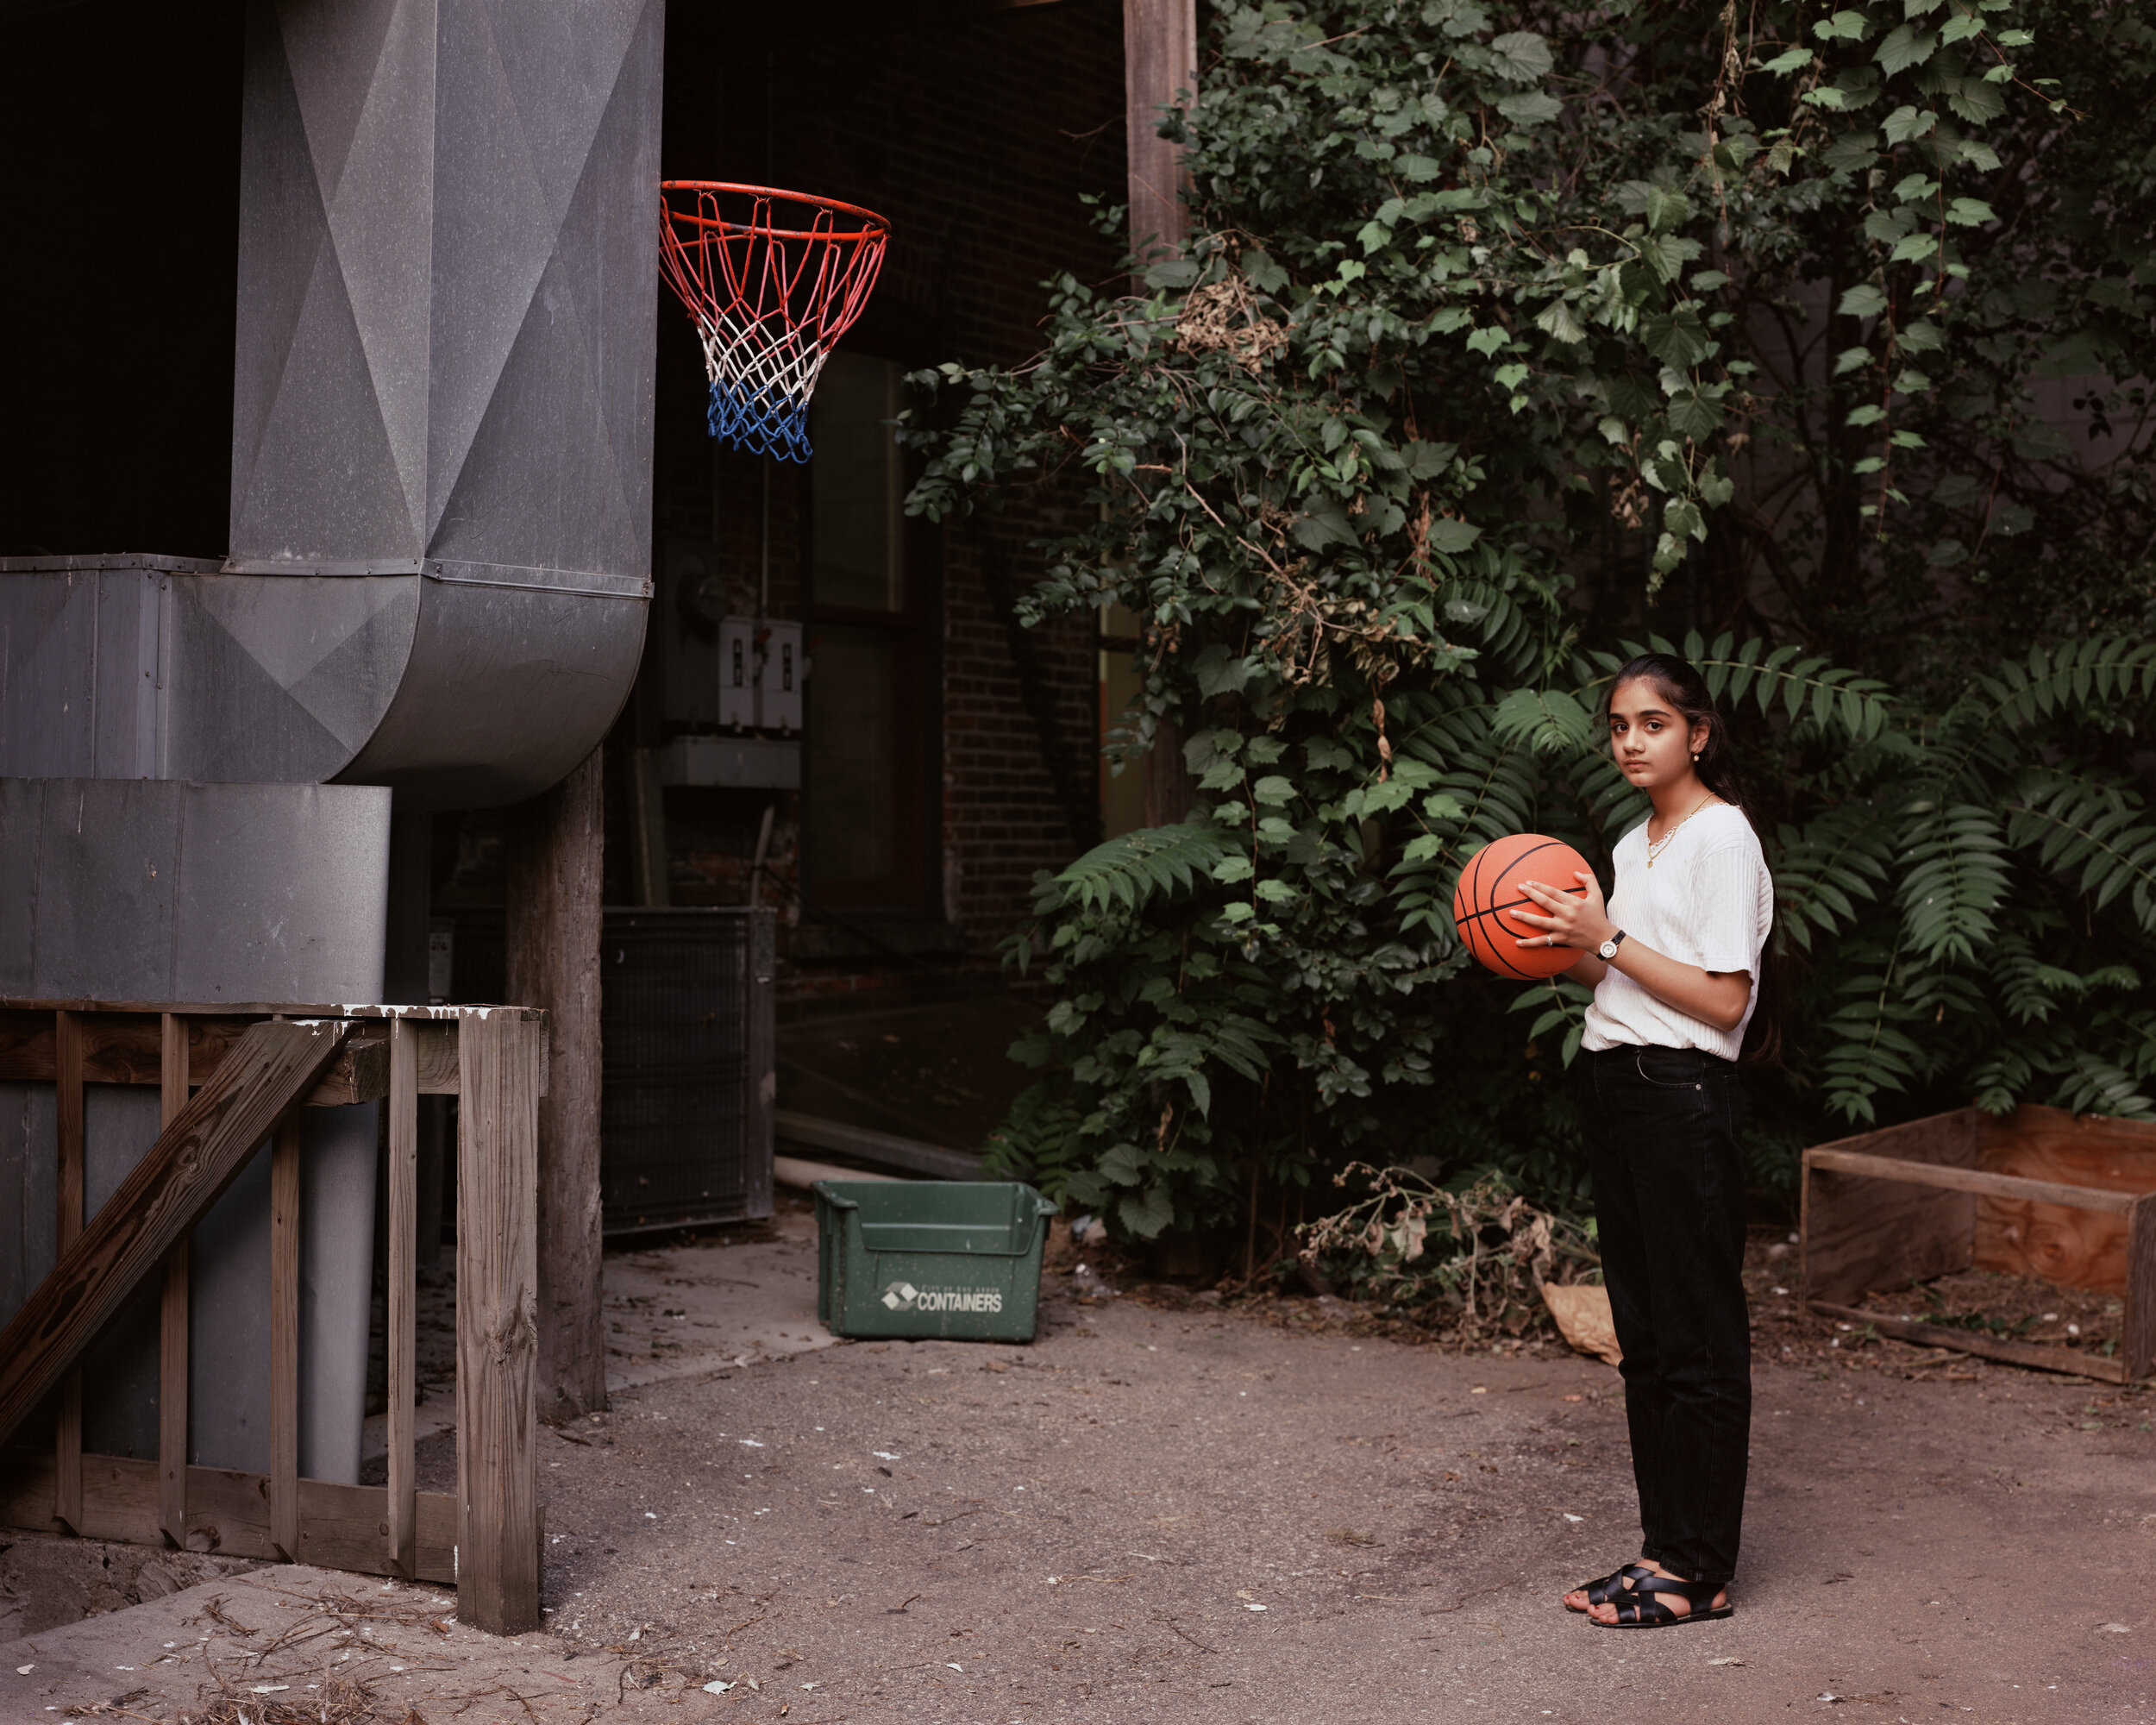 A young woman playing basketball behind her father's restaurant, Ann Arbor, Michigan 1995